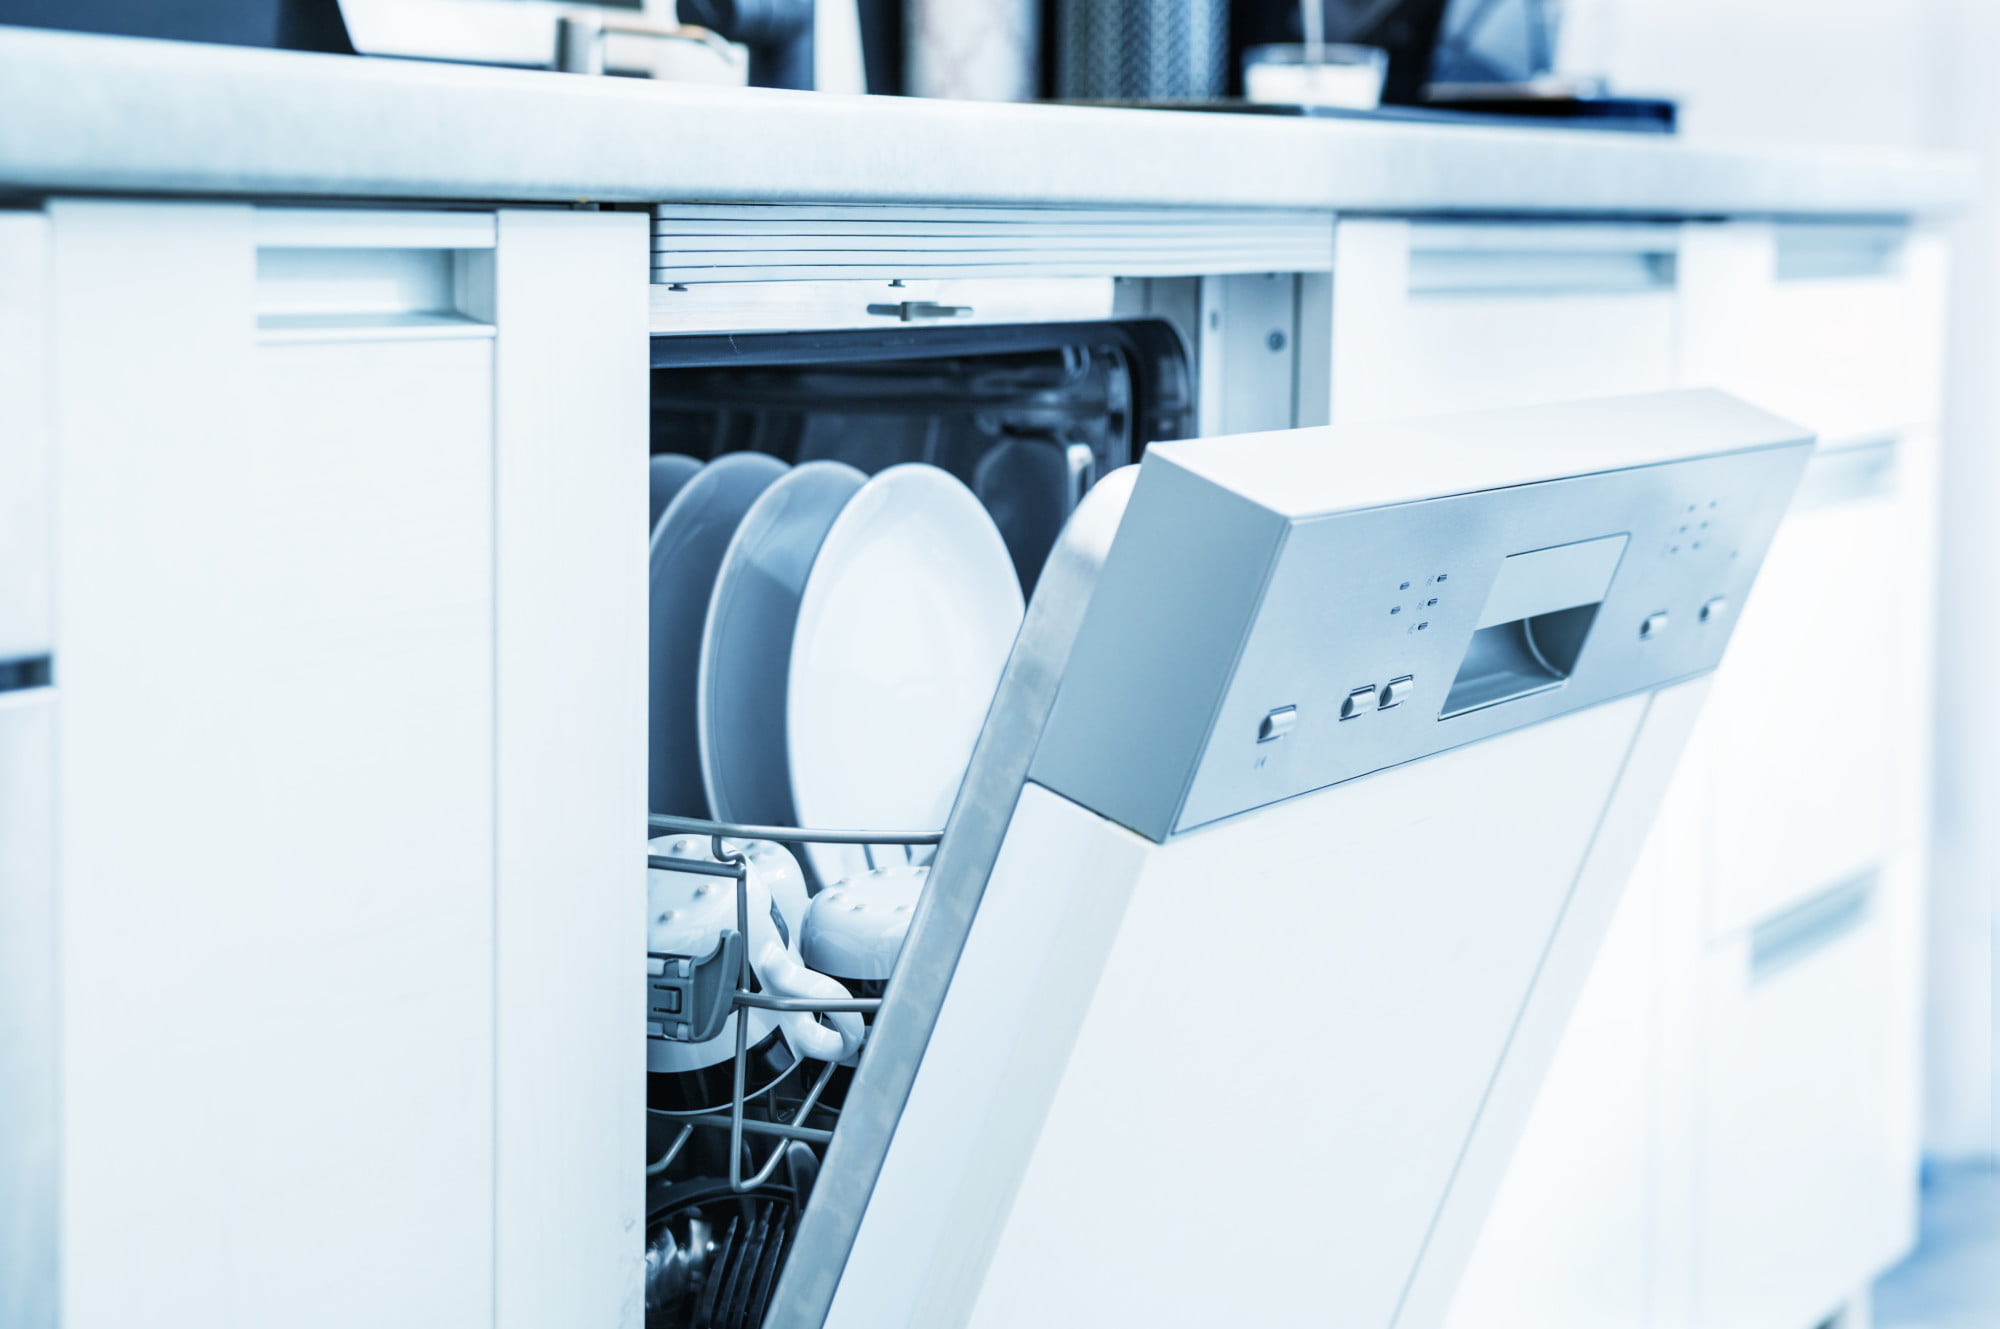 When the most used appliance in your kitchen has sprung a leak, click here to explore common causes and what to do about a leaking dishwasher.